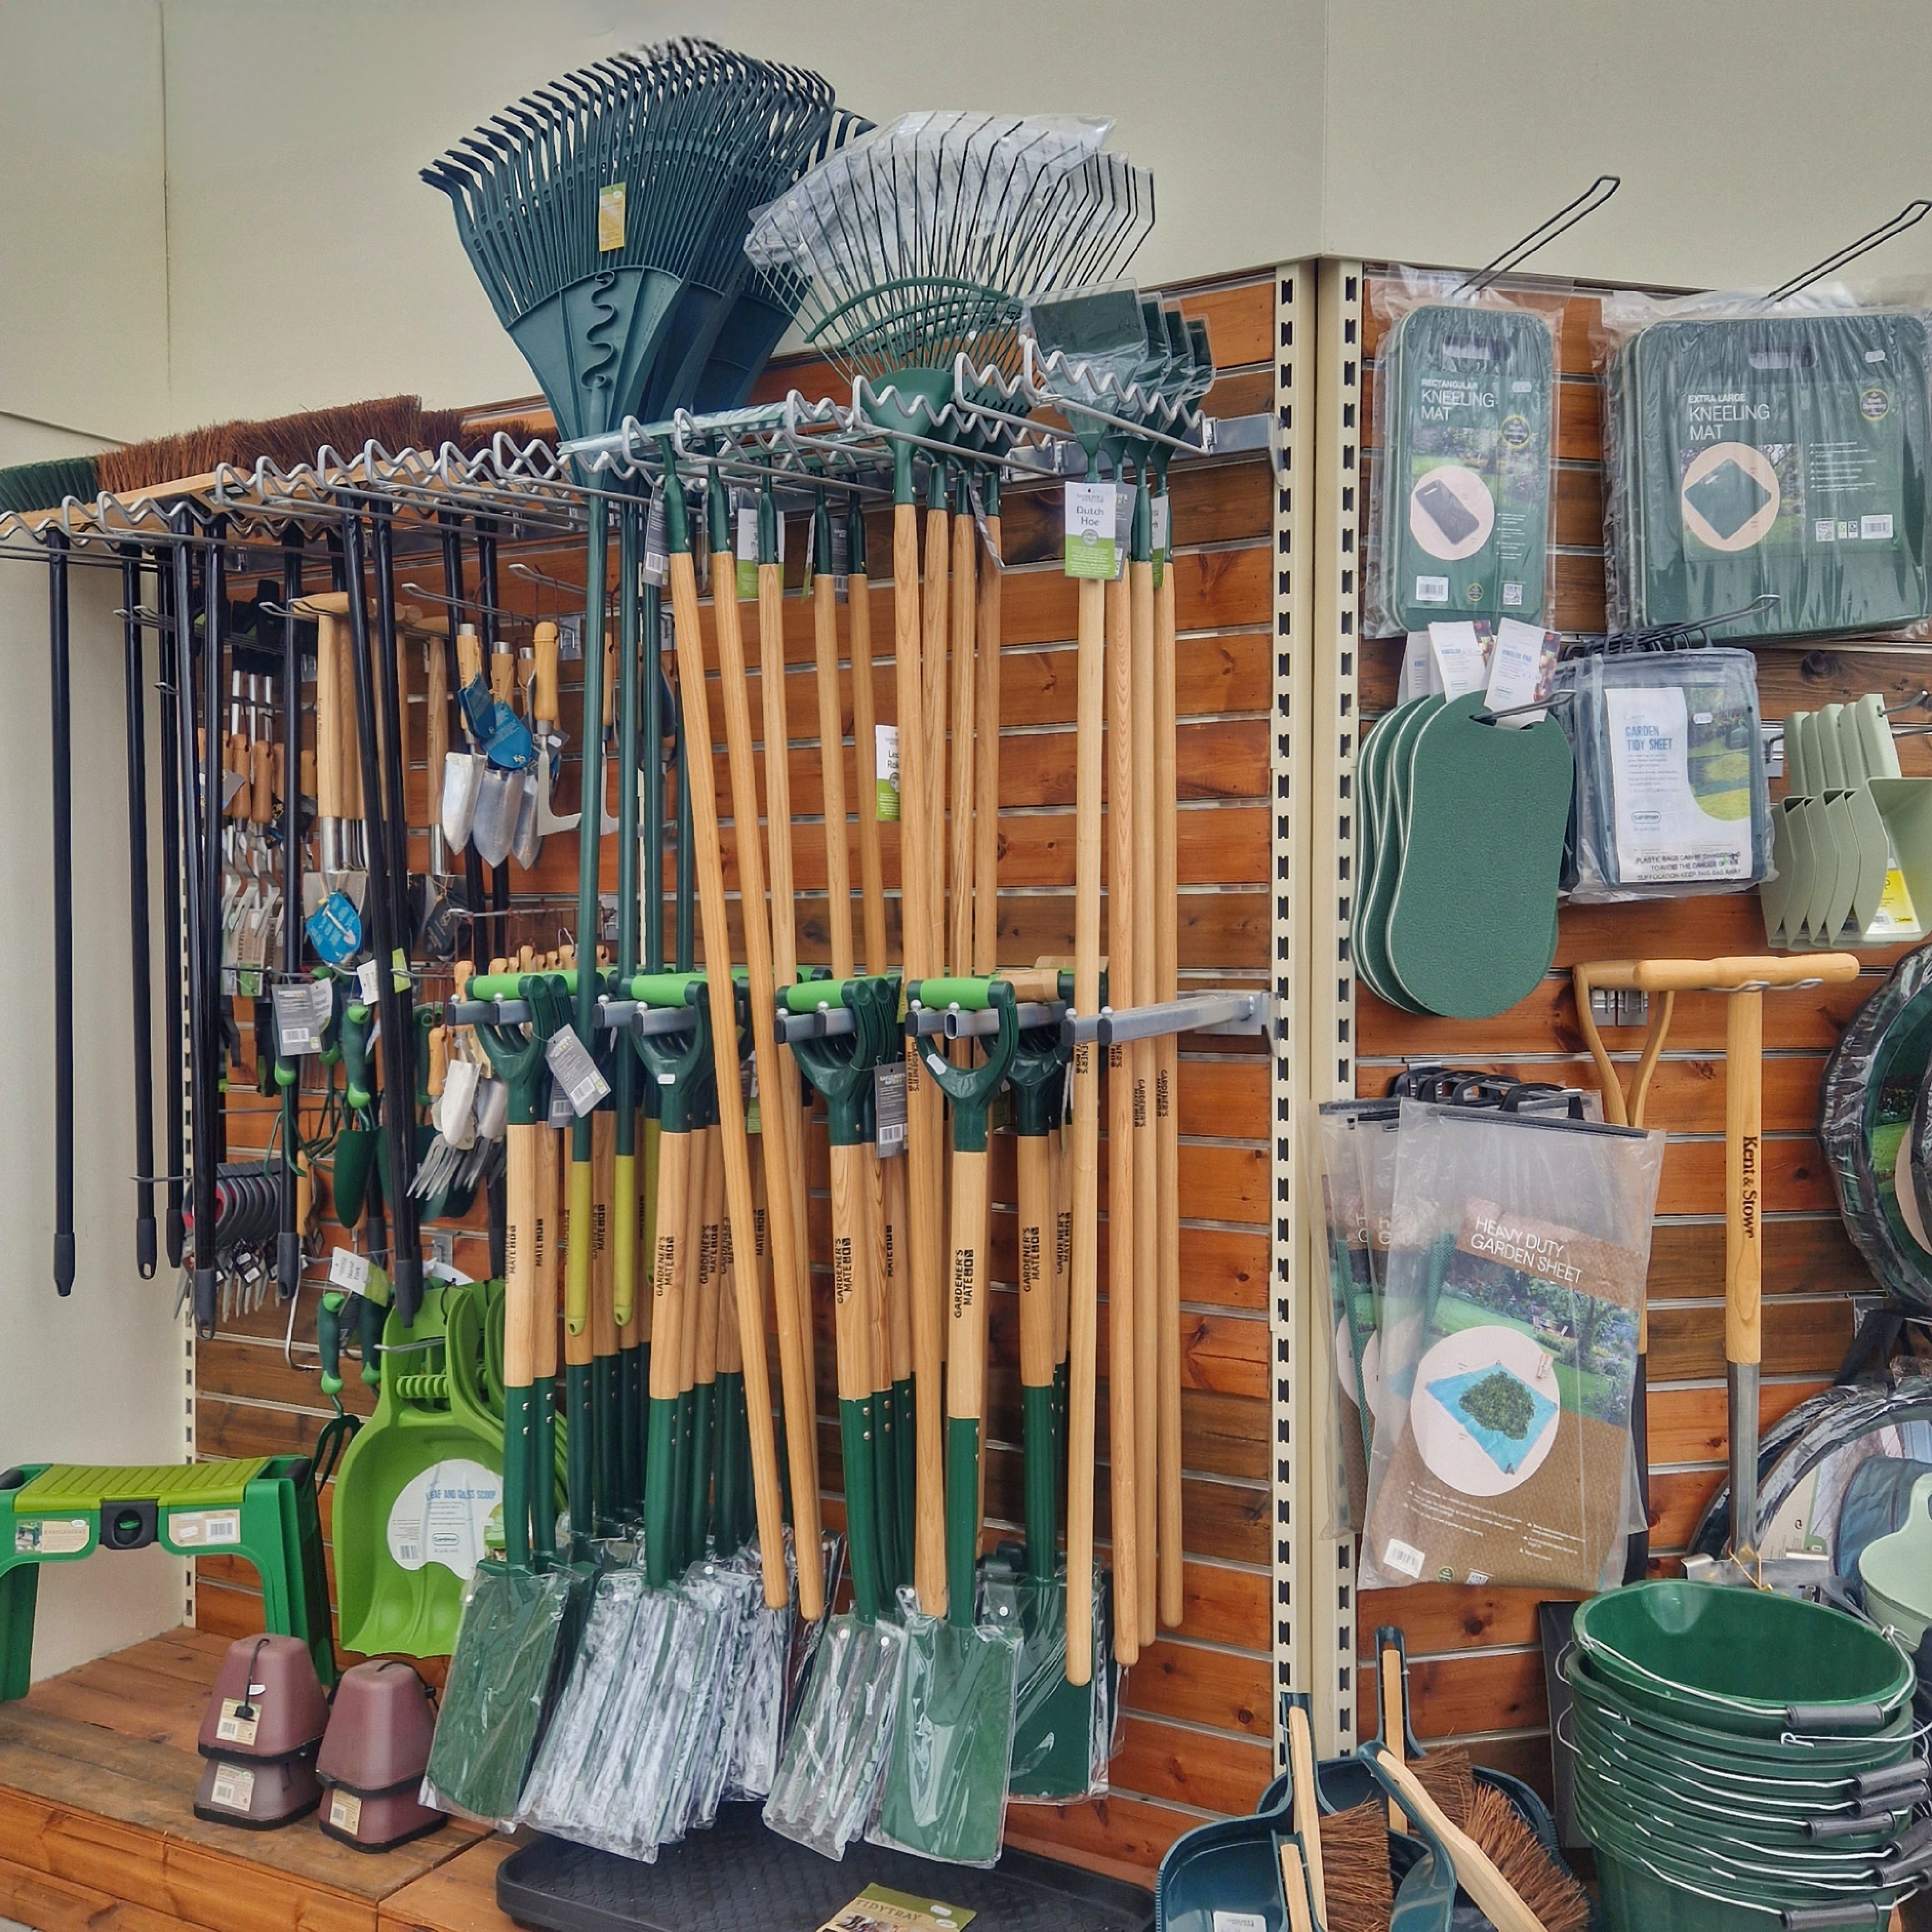 An image of garden tools